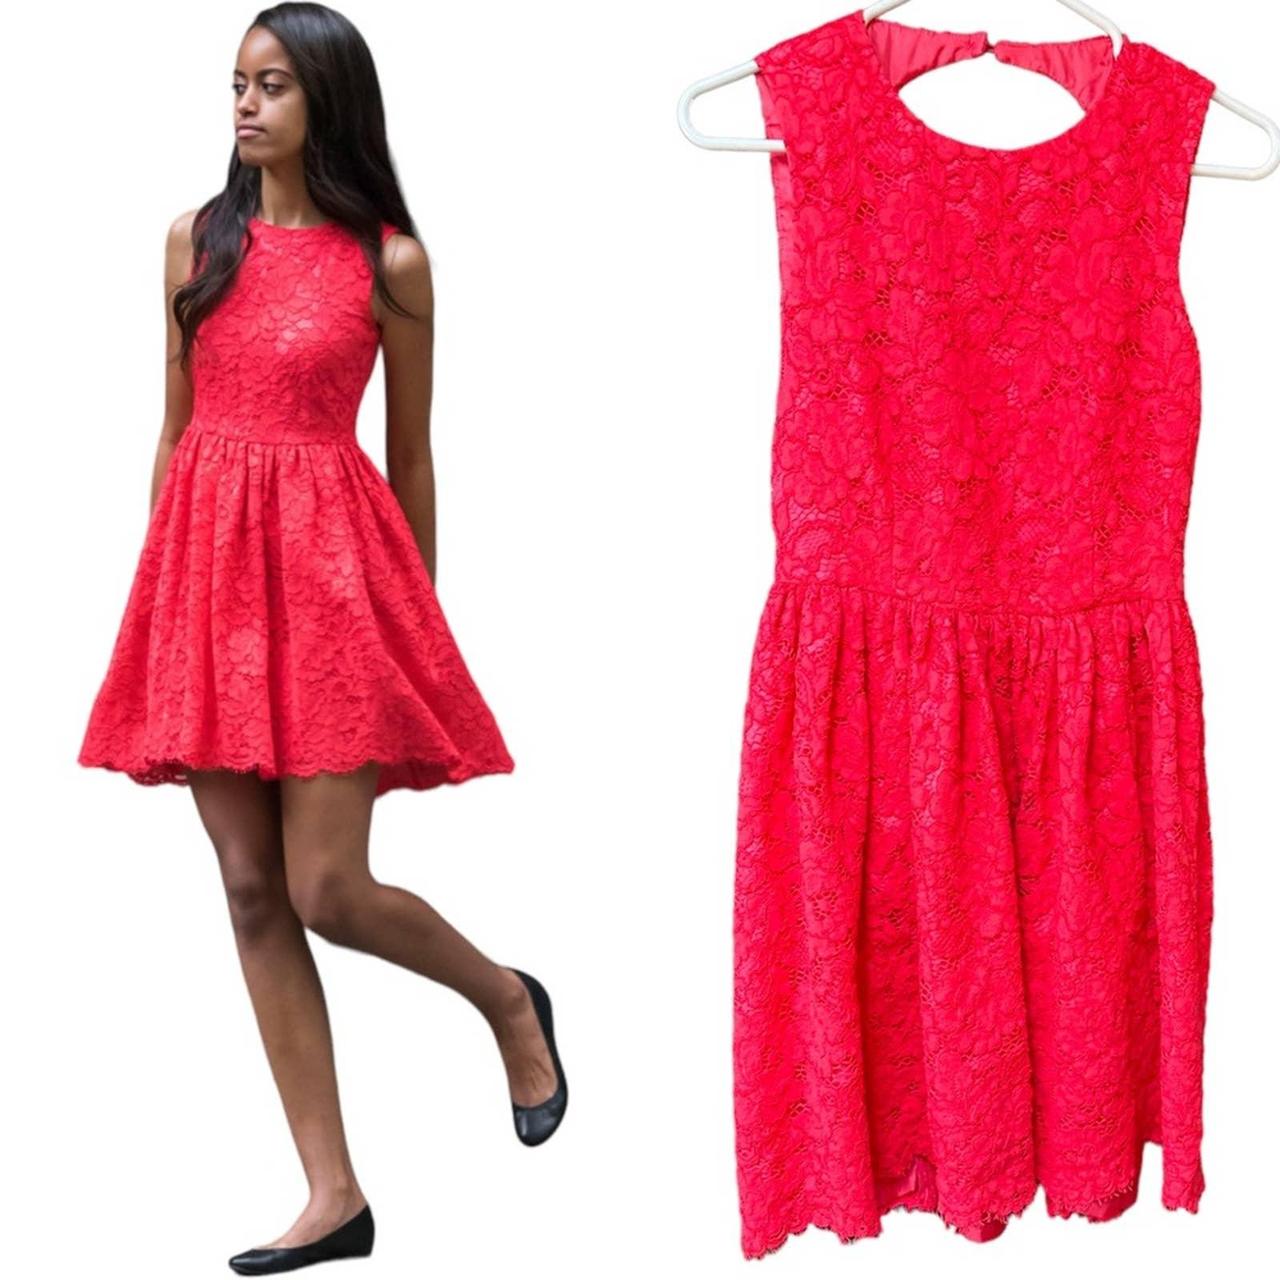 Kate Spade Cocktail Dress | Homecoming Dress | Size 2 | Color: Pink